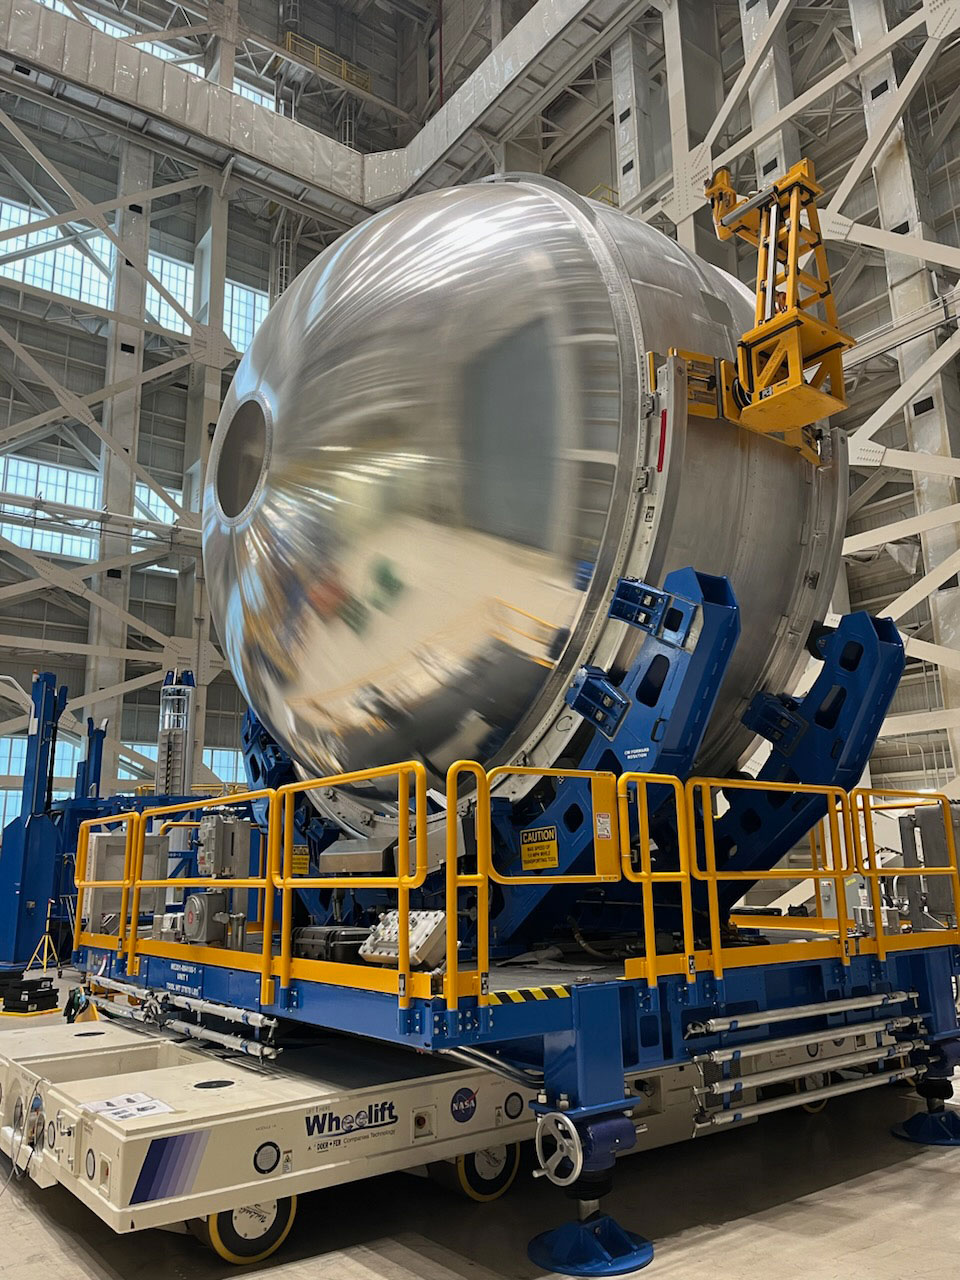 The LOX tank for the EUS WCA stands completed in Building 115 of NASA’s Michoud Assembly Facility